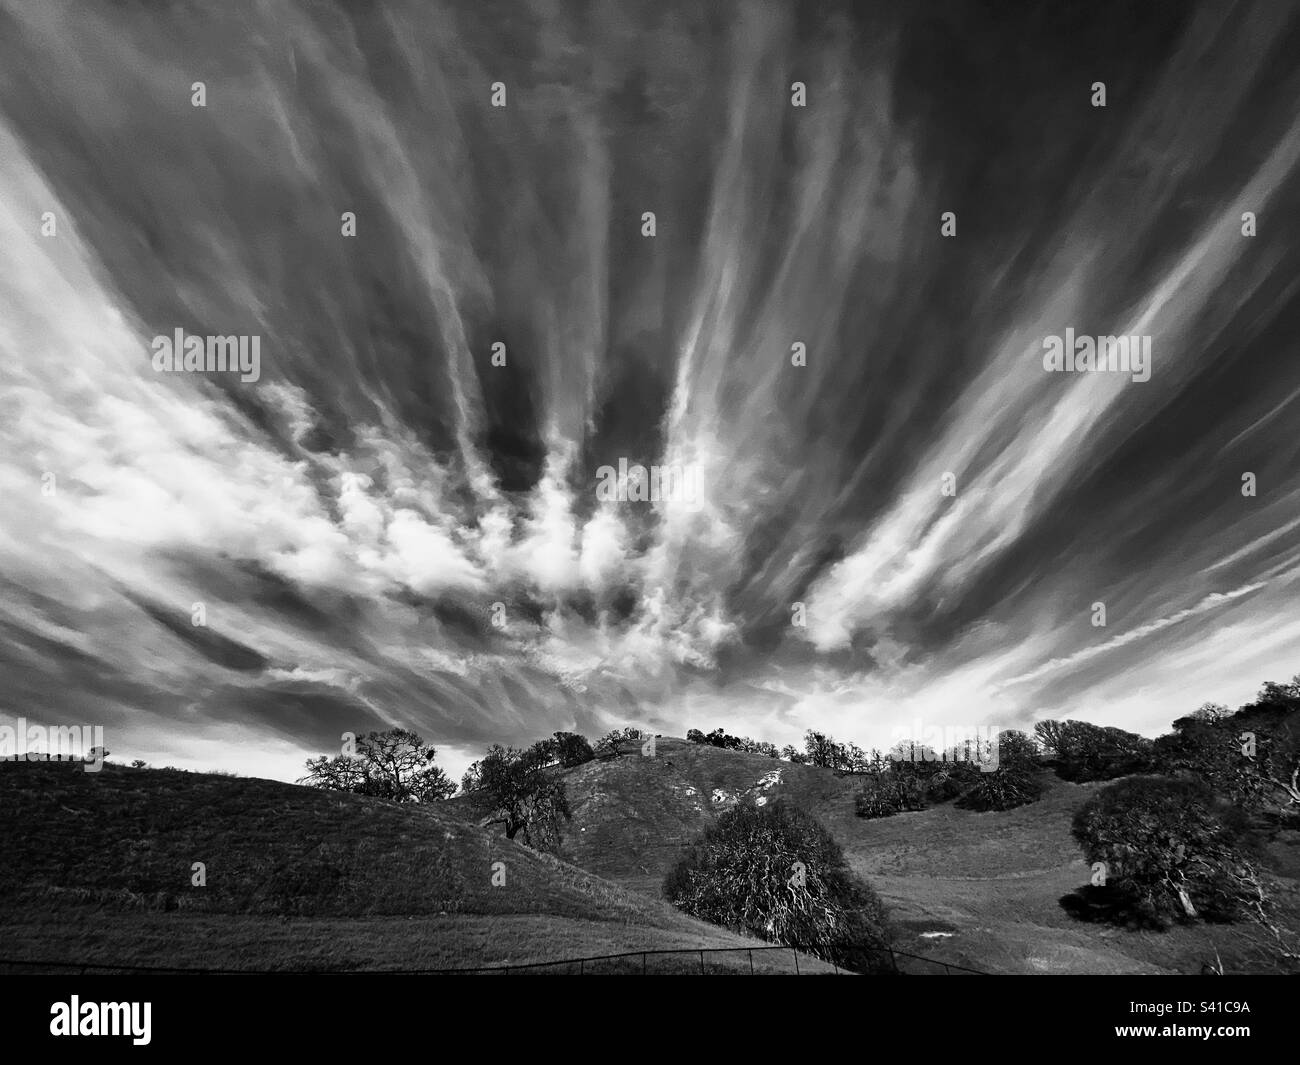 Cloudscape over foothills, in black and white Stock Photo